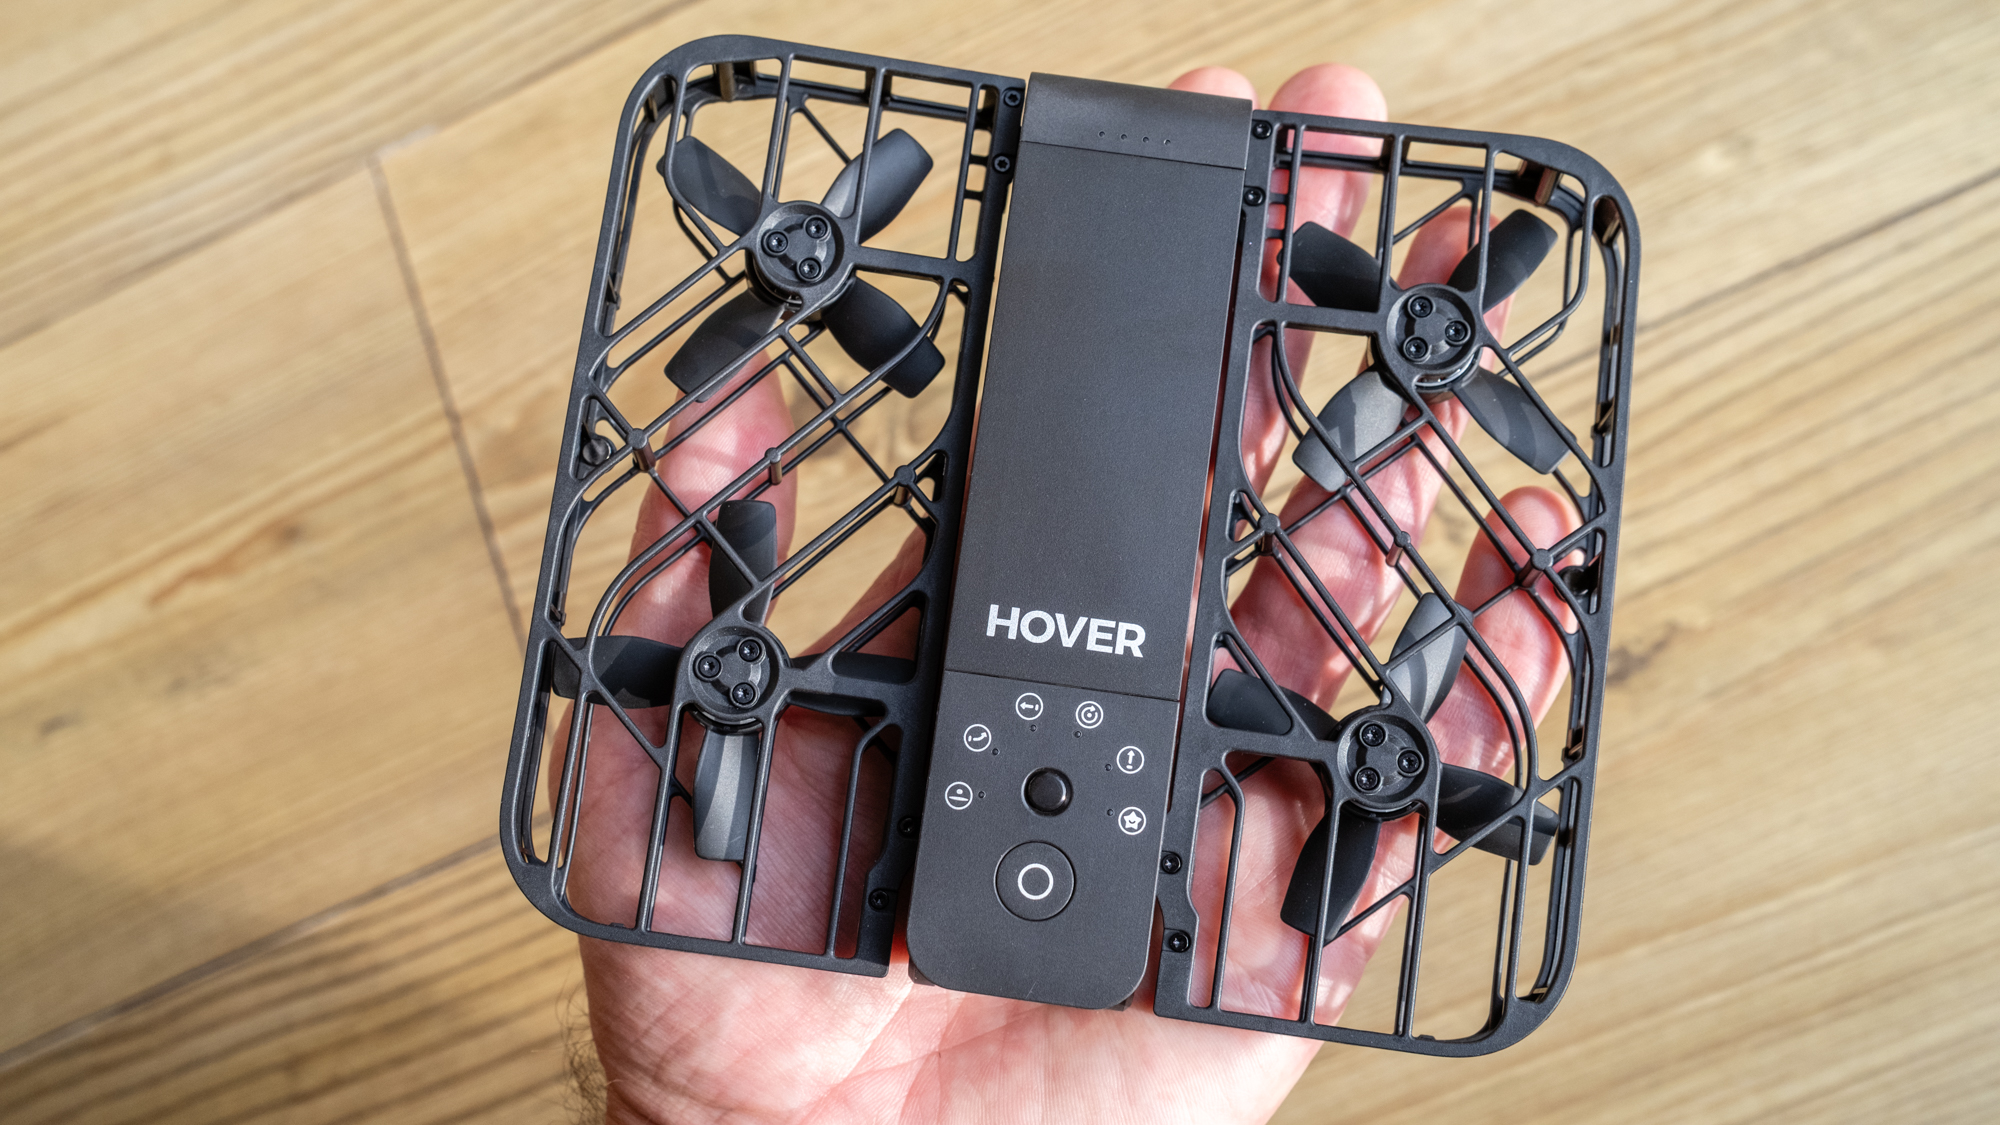 a square drone sits in someone's hand. the quad copter blades are protected on top and bottom by a black grid.